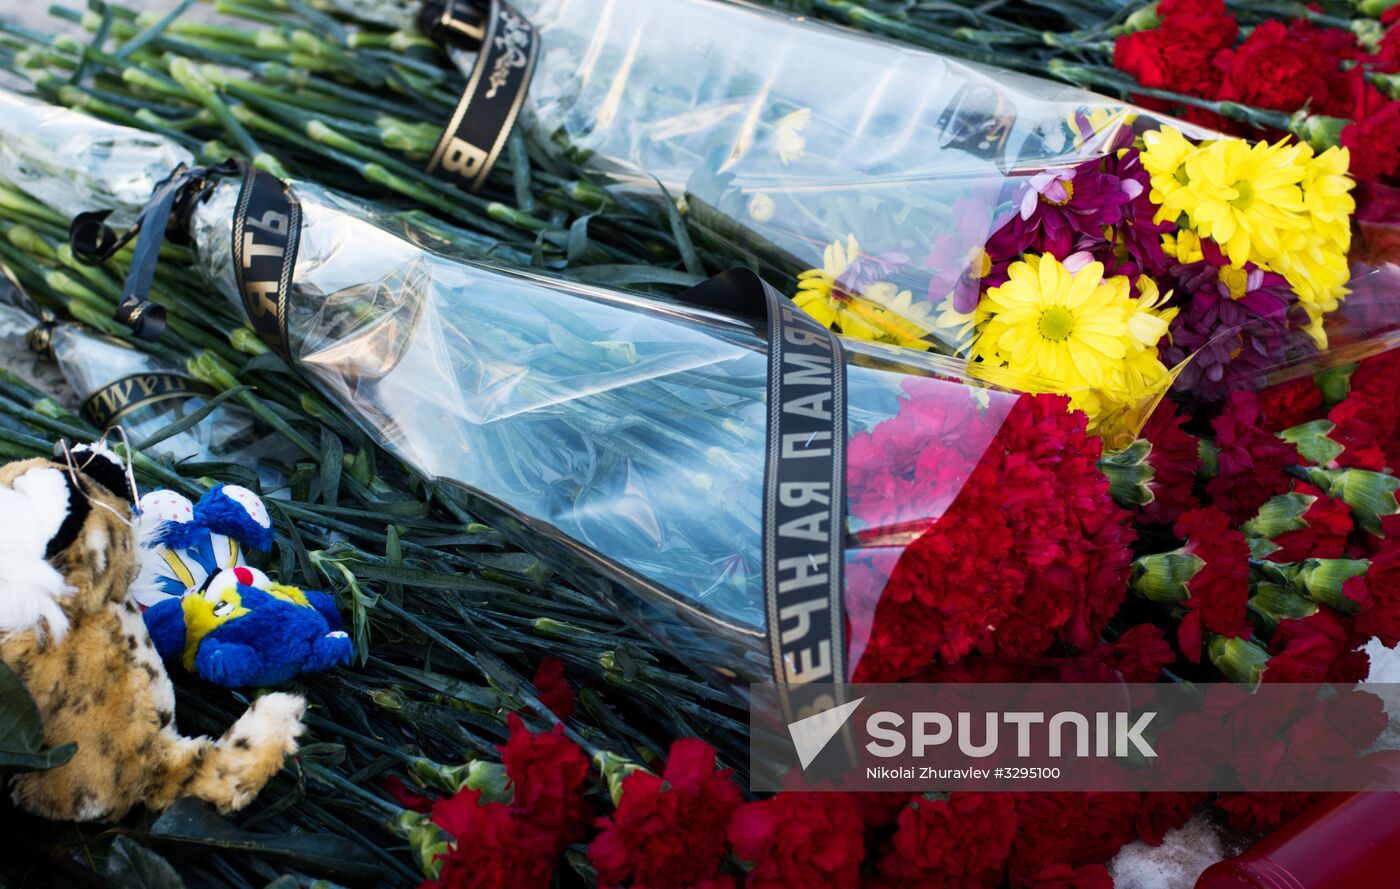 Residents of Orenburg bring flowers to monument of Valery Chkalov to commemorate victims of An-148 crash